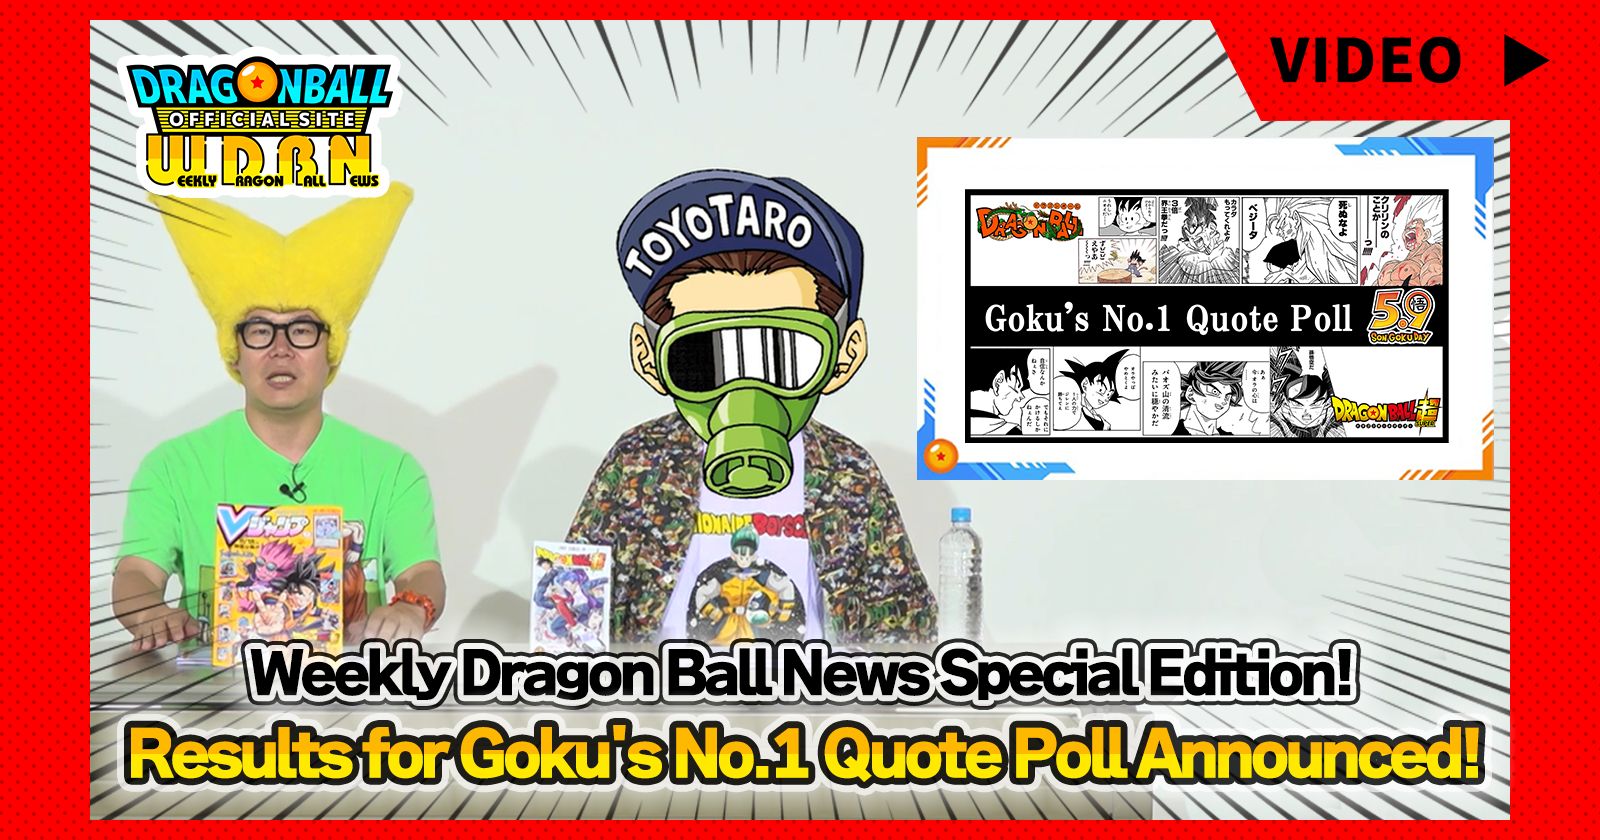 [August 21st] Weekly Dragon Ball News Special Edition! Results for Goku's No.1 Quote Poll Announced!